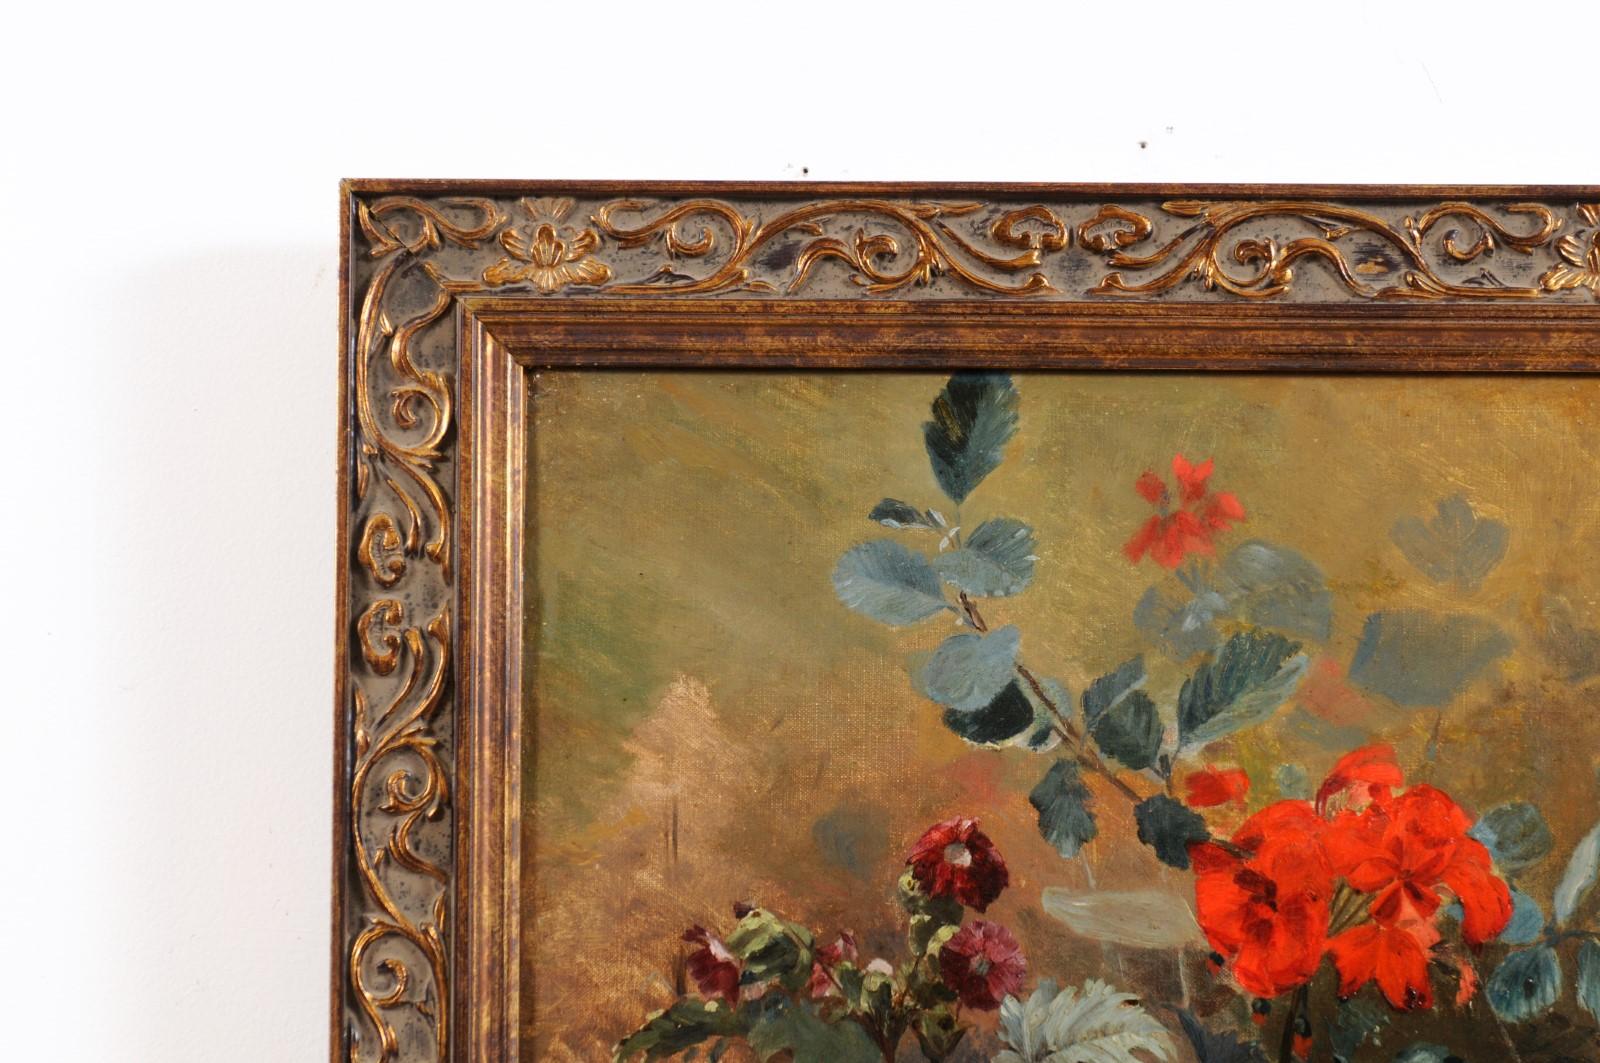 Hand-Painted French 19th Century Framed Oil on Canvas Floral Painting Signed Murat